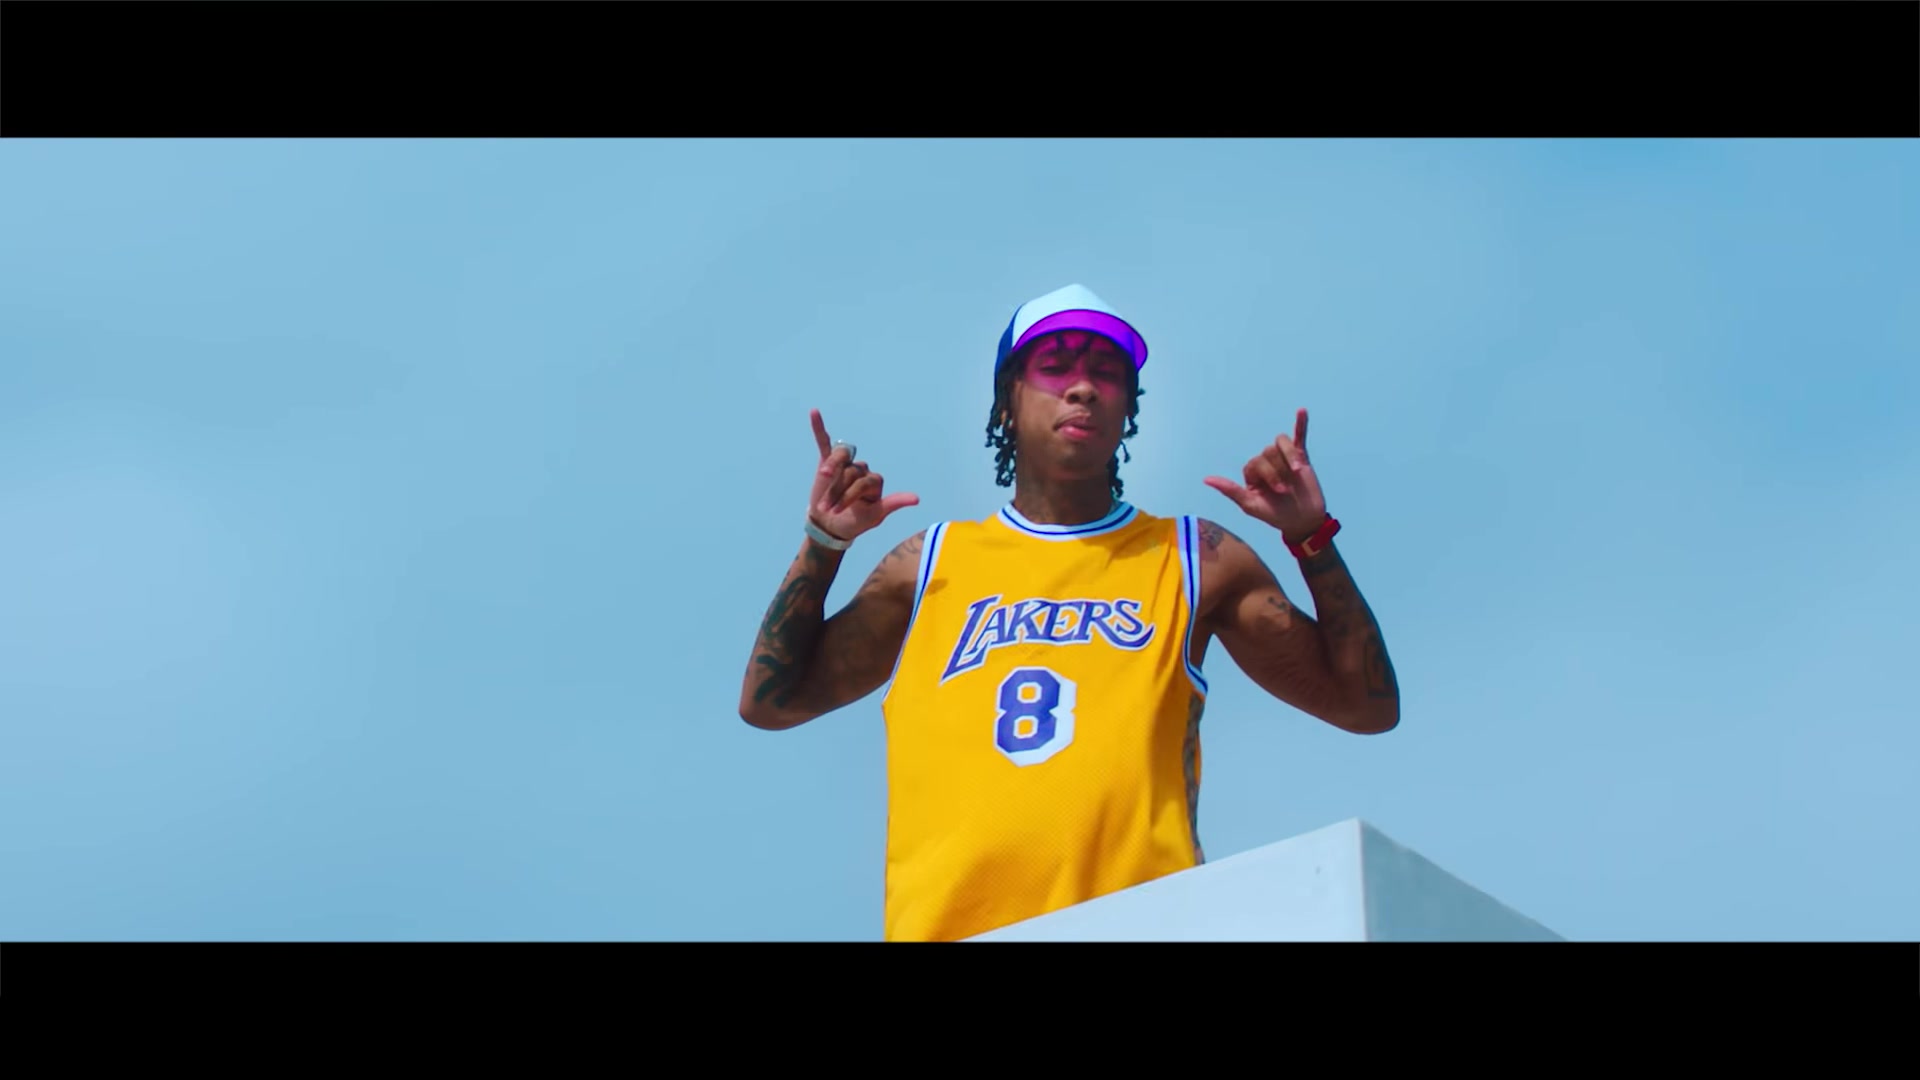 Lakers Jersey in “Taste” by Tyga ft. Offset (2018) Official Music Video1920 x 1080